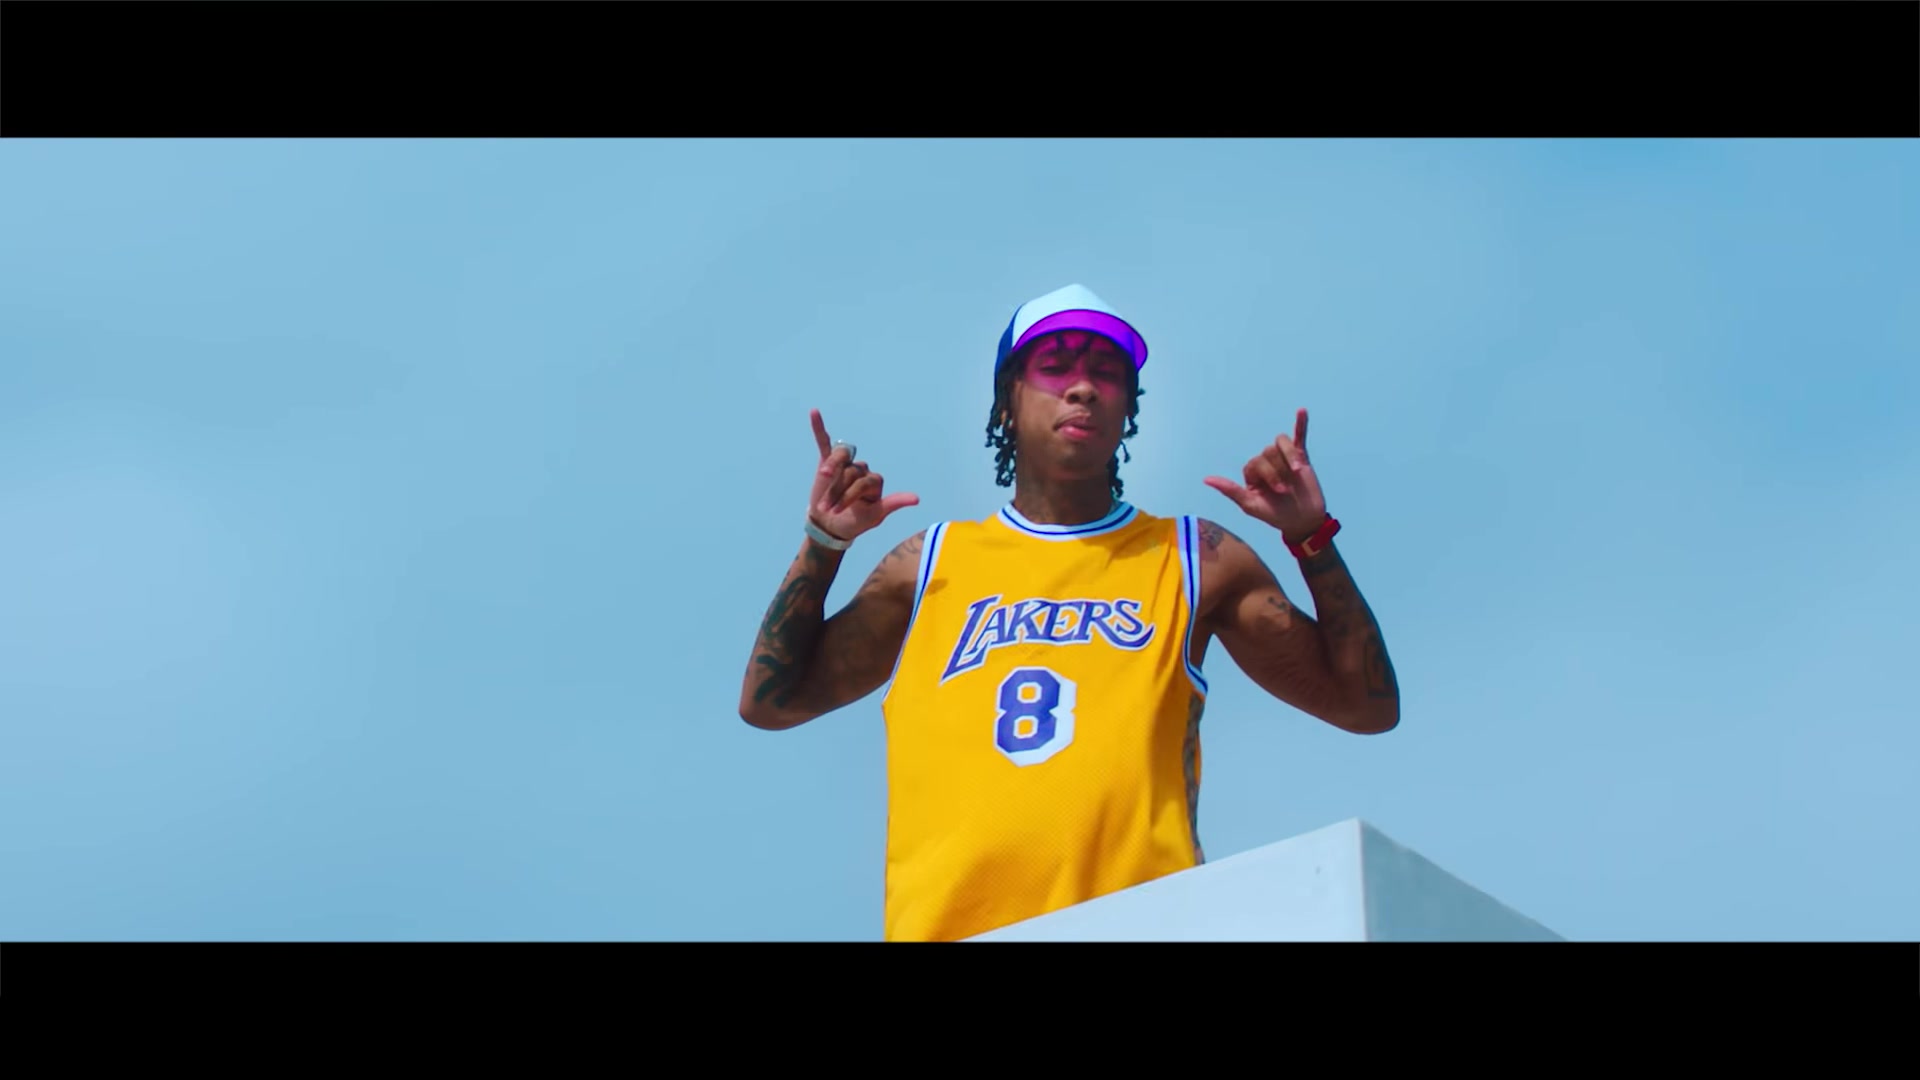 Lakers Jersey in “Taste” by Tyga ft. Offset (2018) Official Music Video1920 x 1080